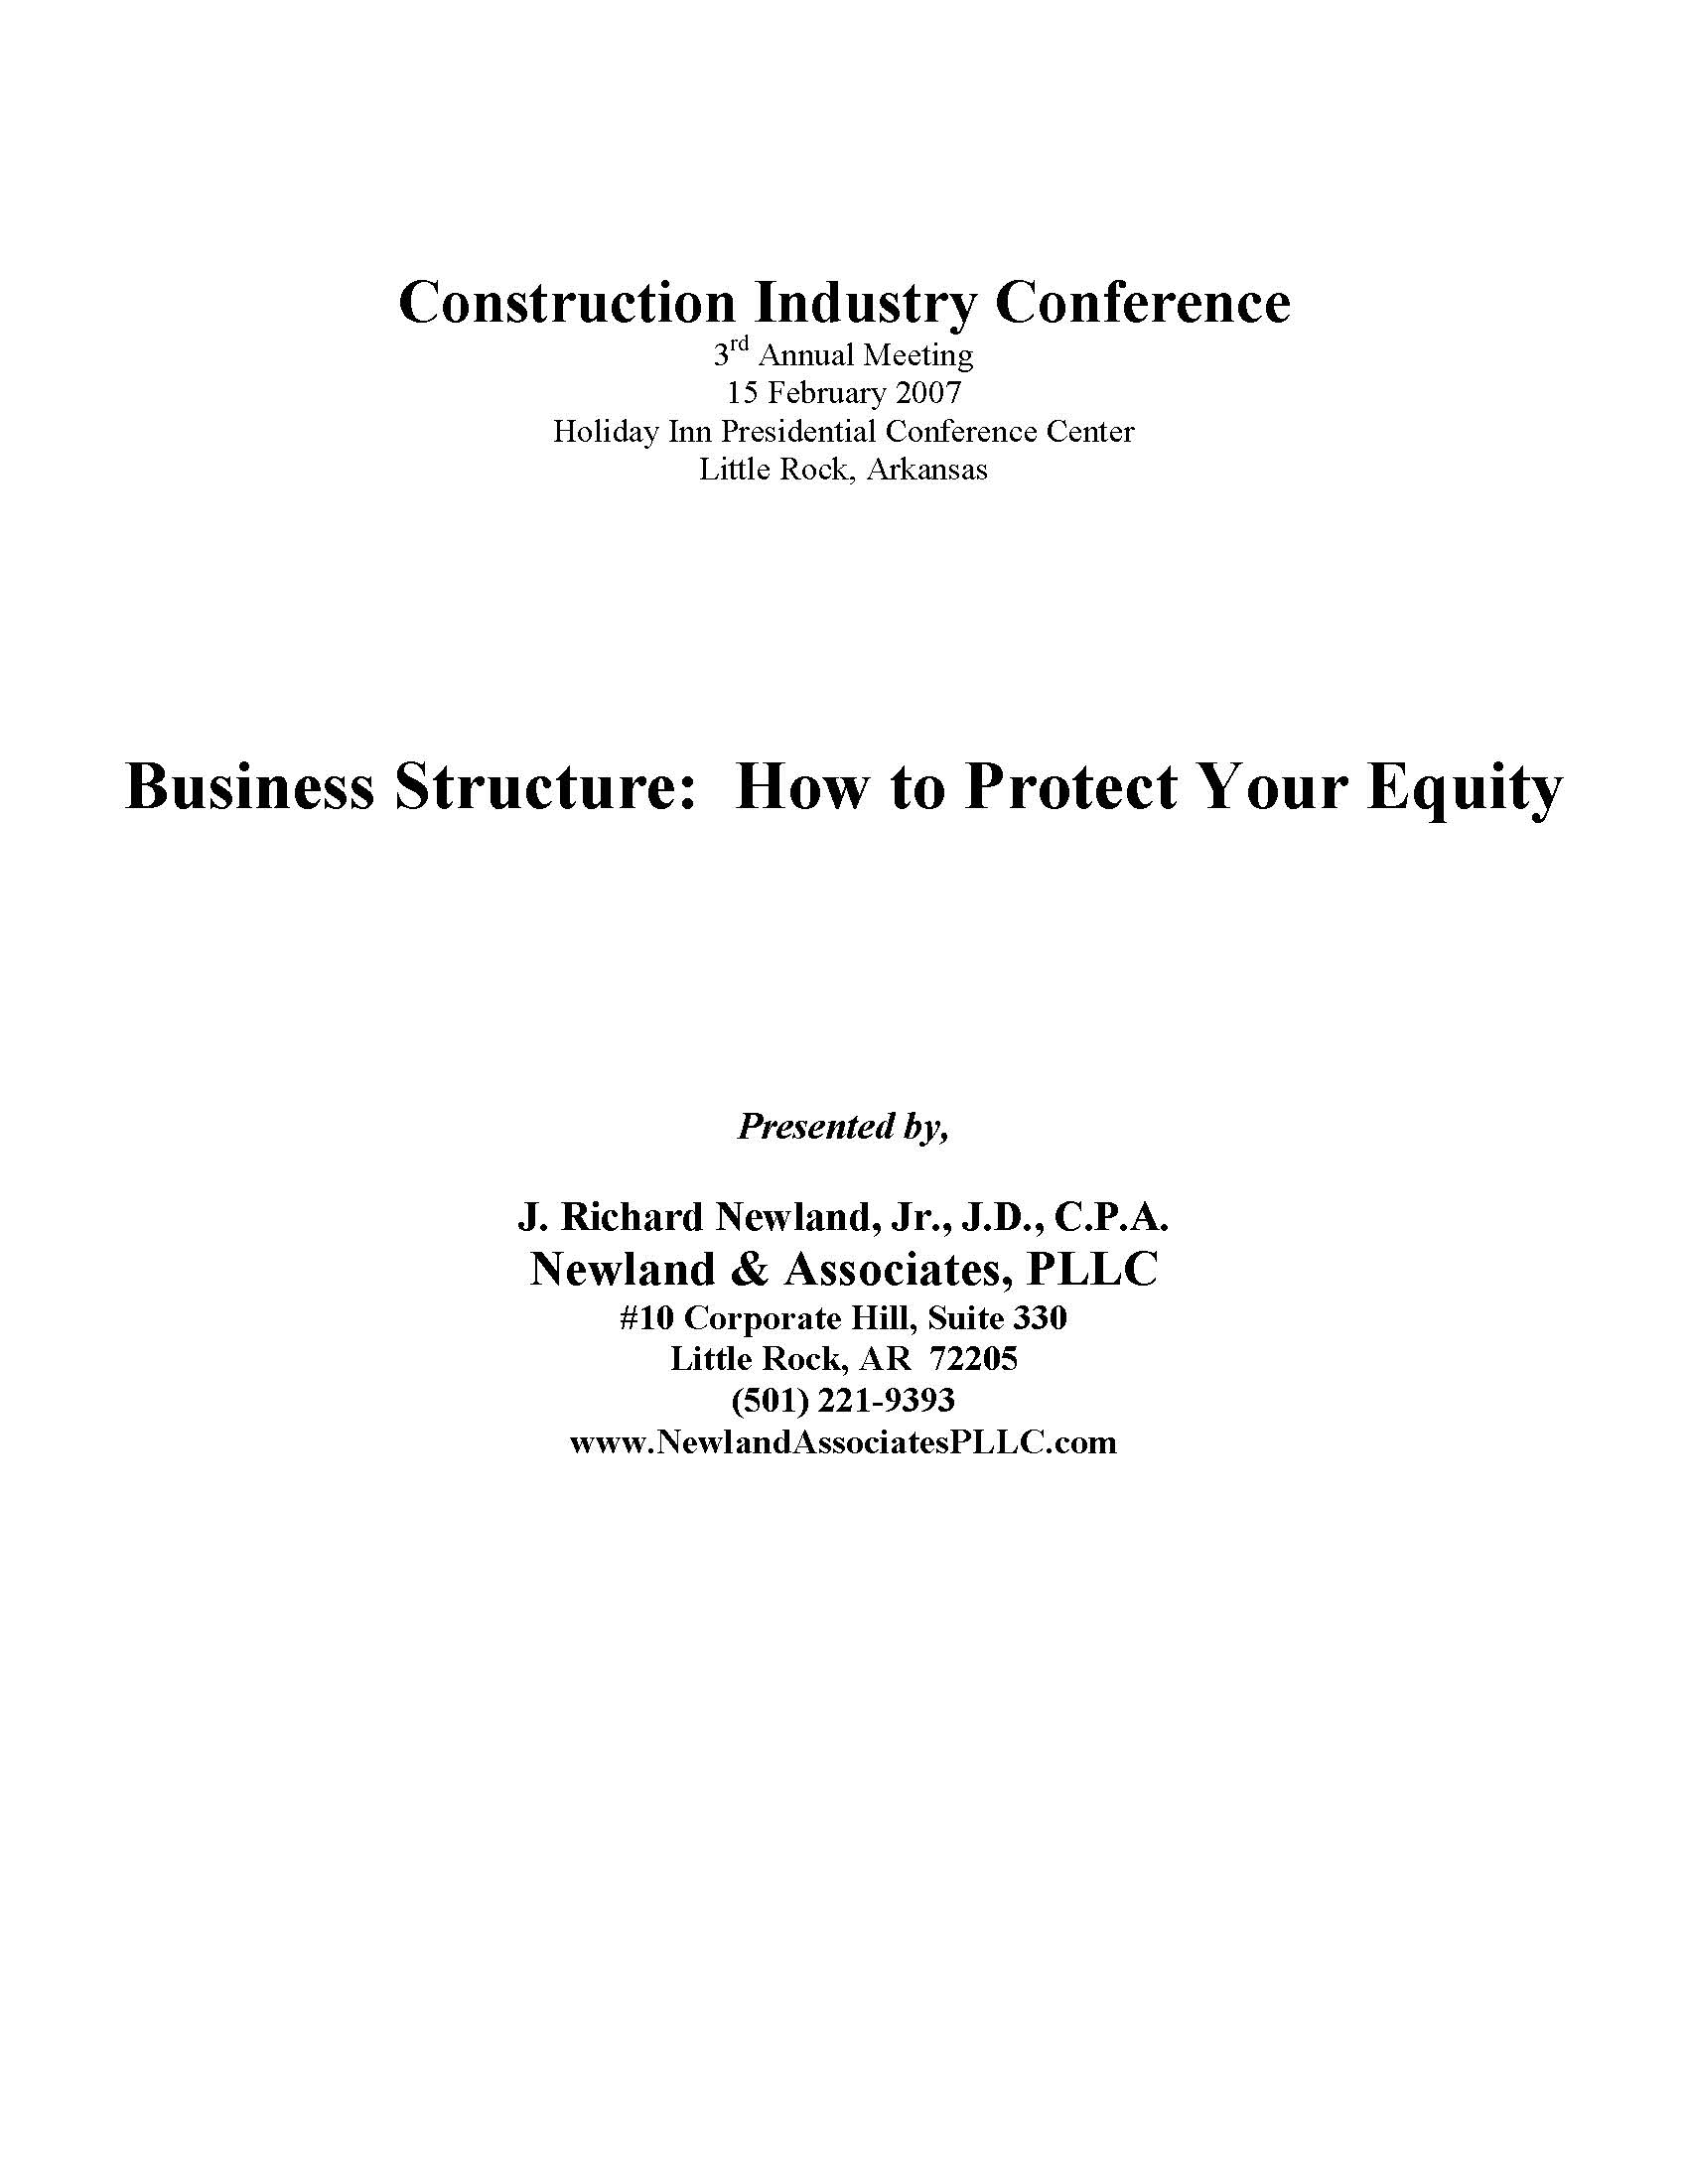 construction-business-structure-how-to-protect-your-equity_Page_01.jpg